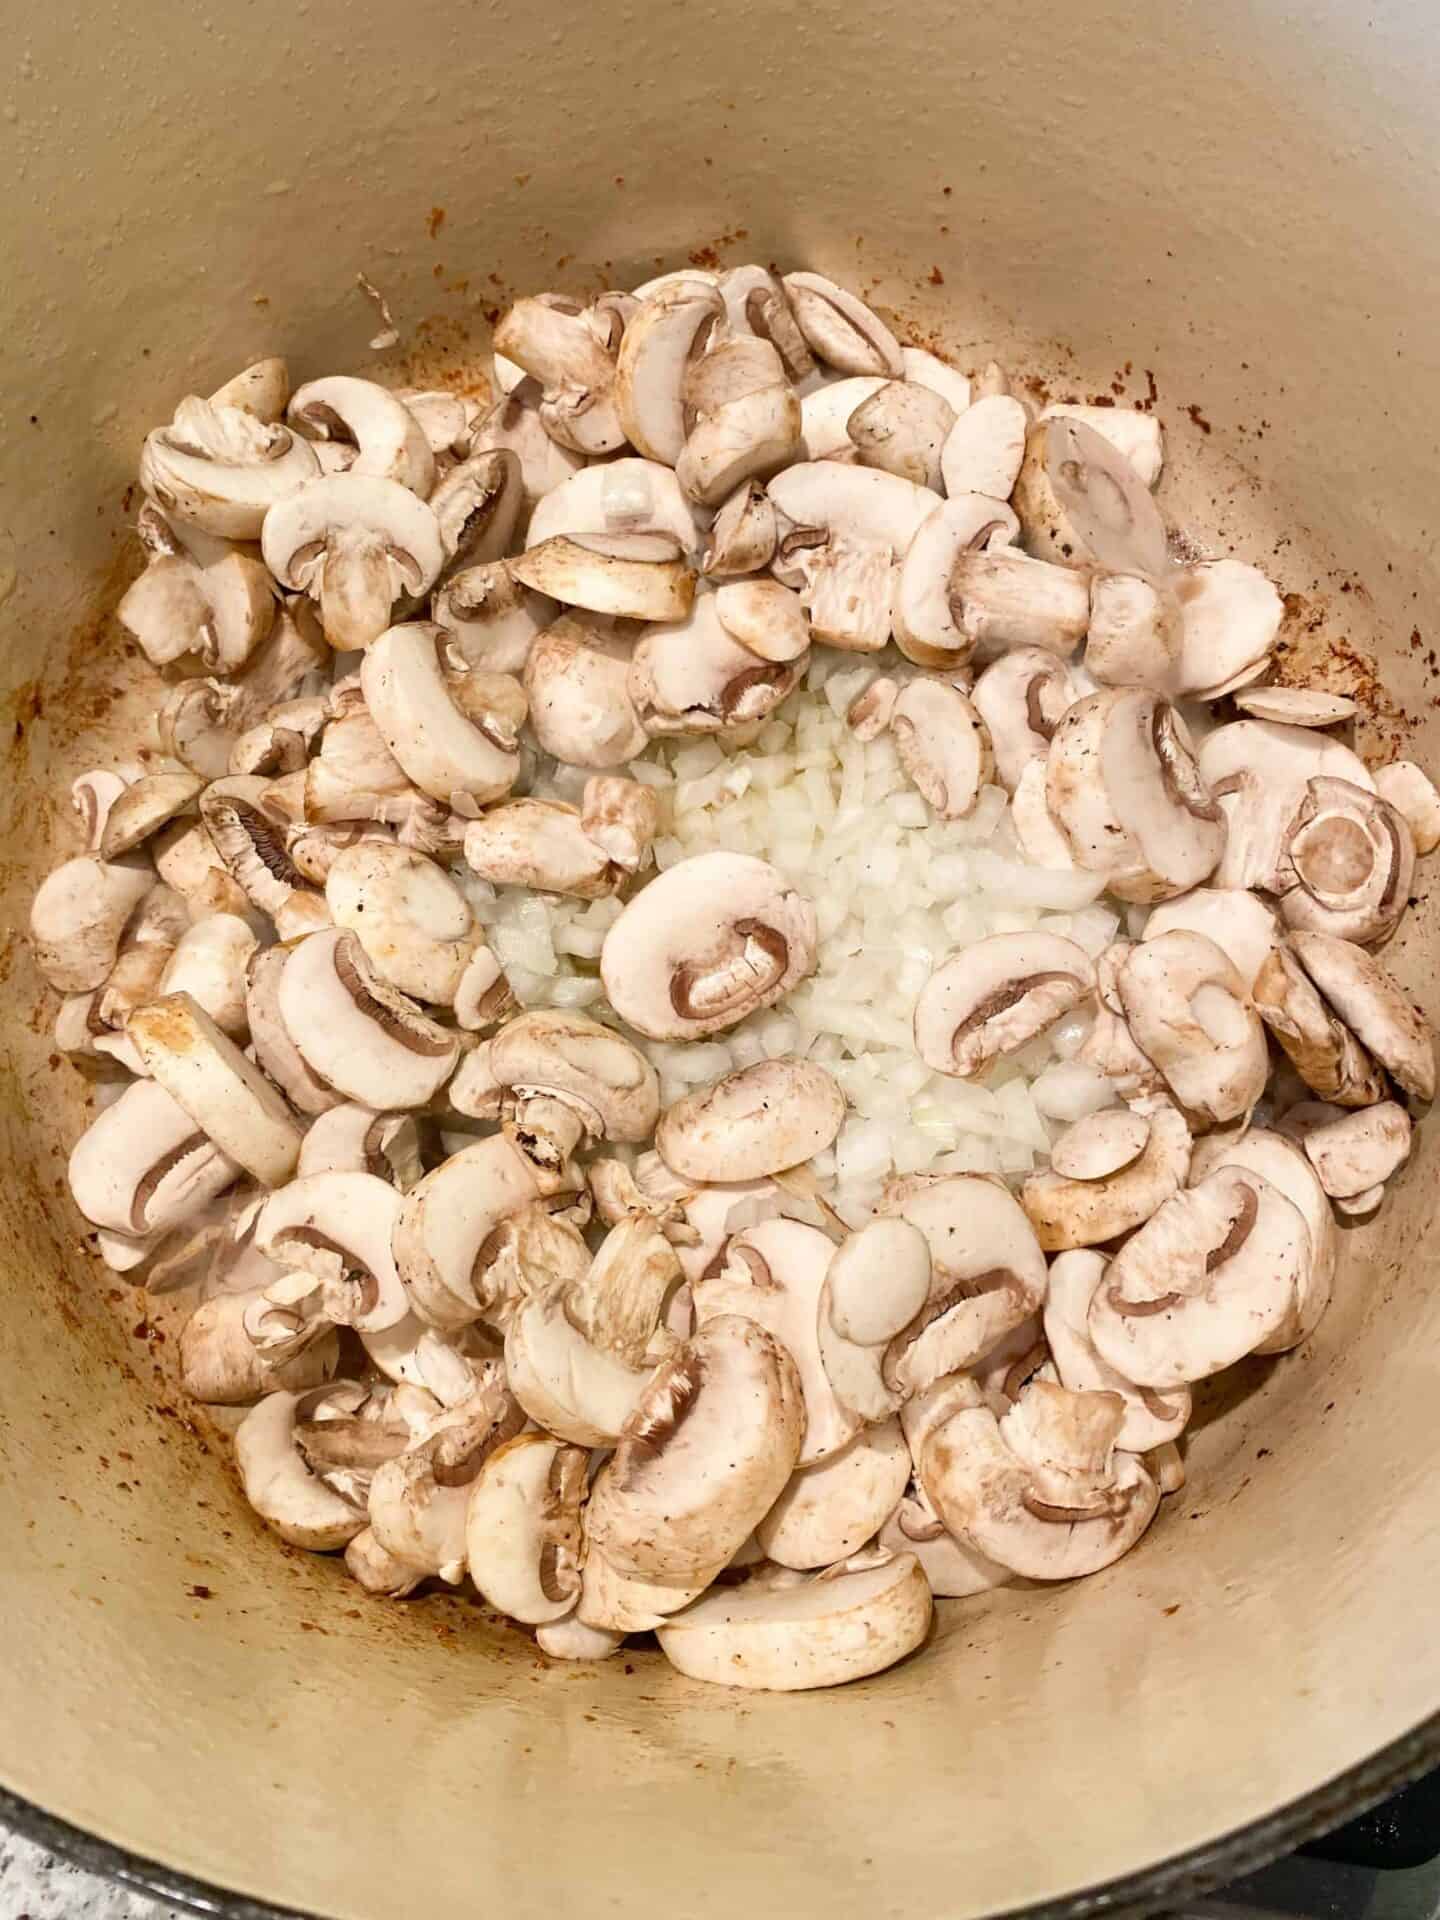 saute-mushrooms-and-onions-for-about-8-minutes